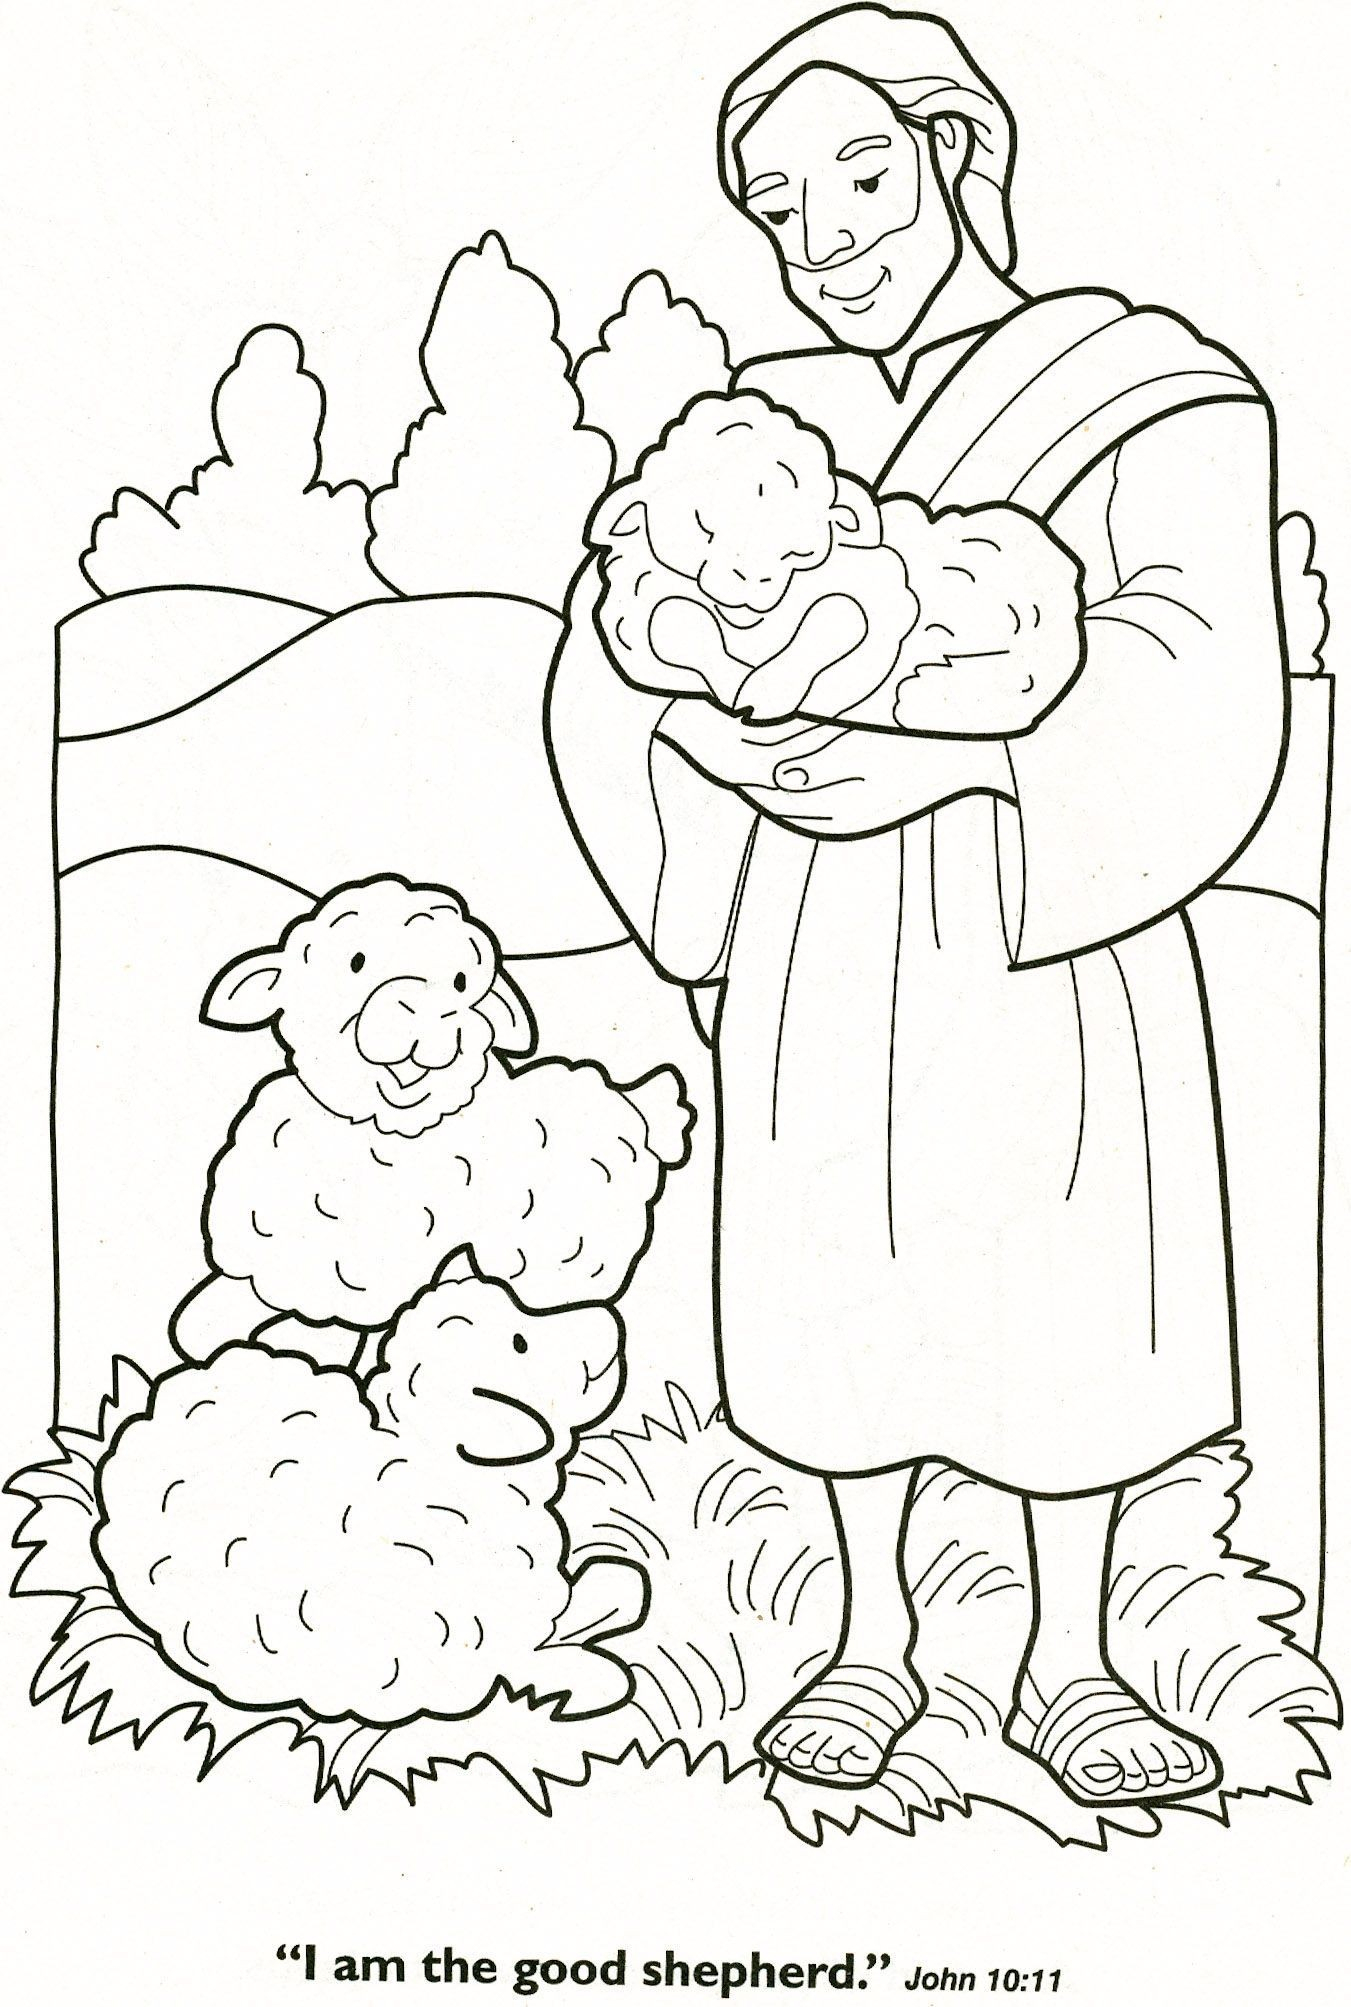 Sheep Face Coloring Page Sheep Coloring Page Jesus The Good Shepherd Coloring Page New